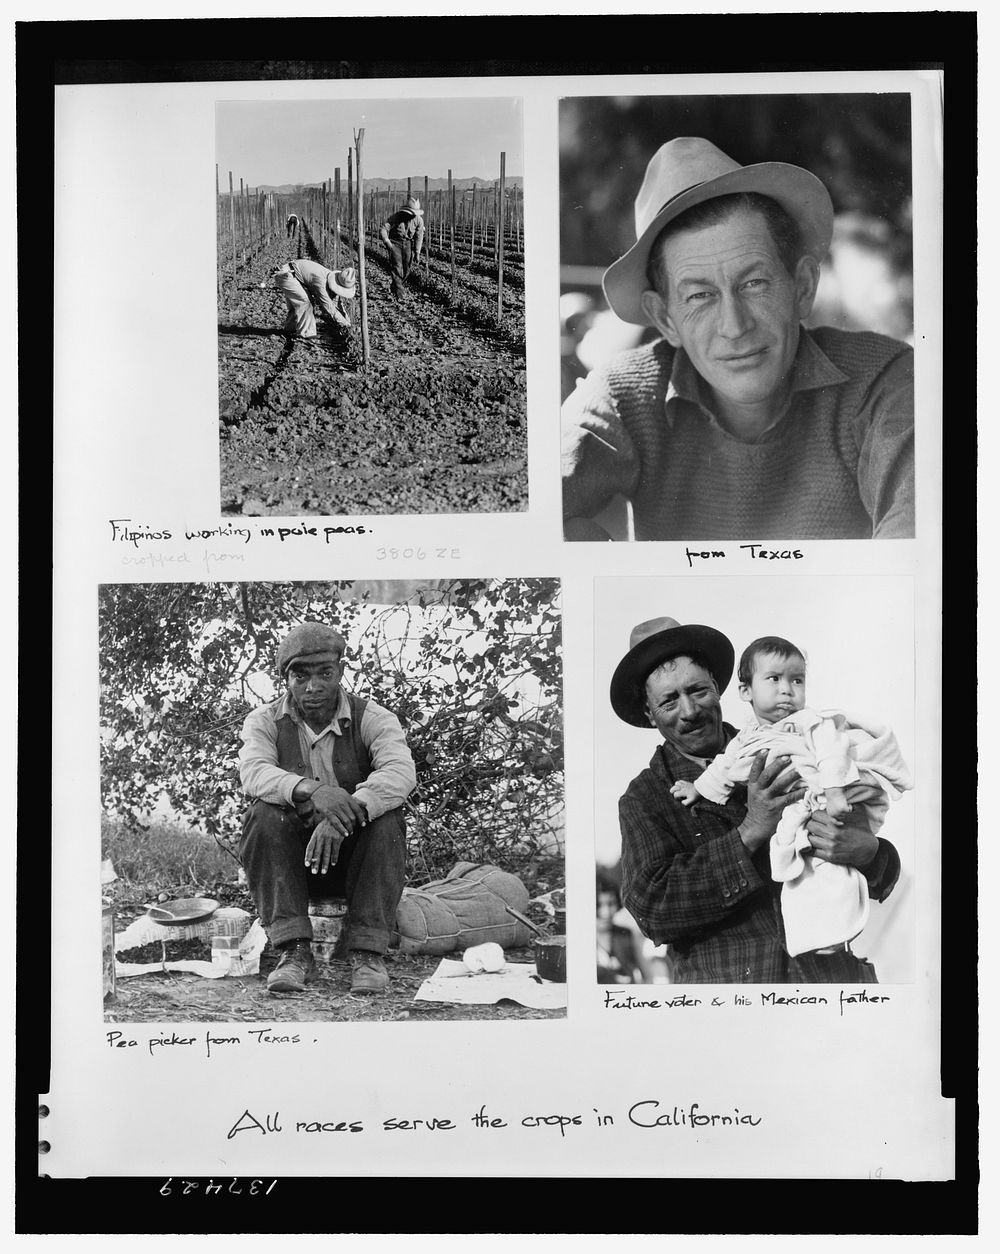 All races serve the crops in California. Sourced from the Library of Congress.